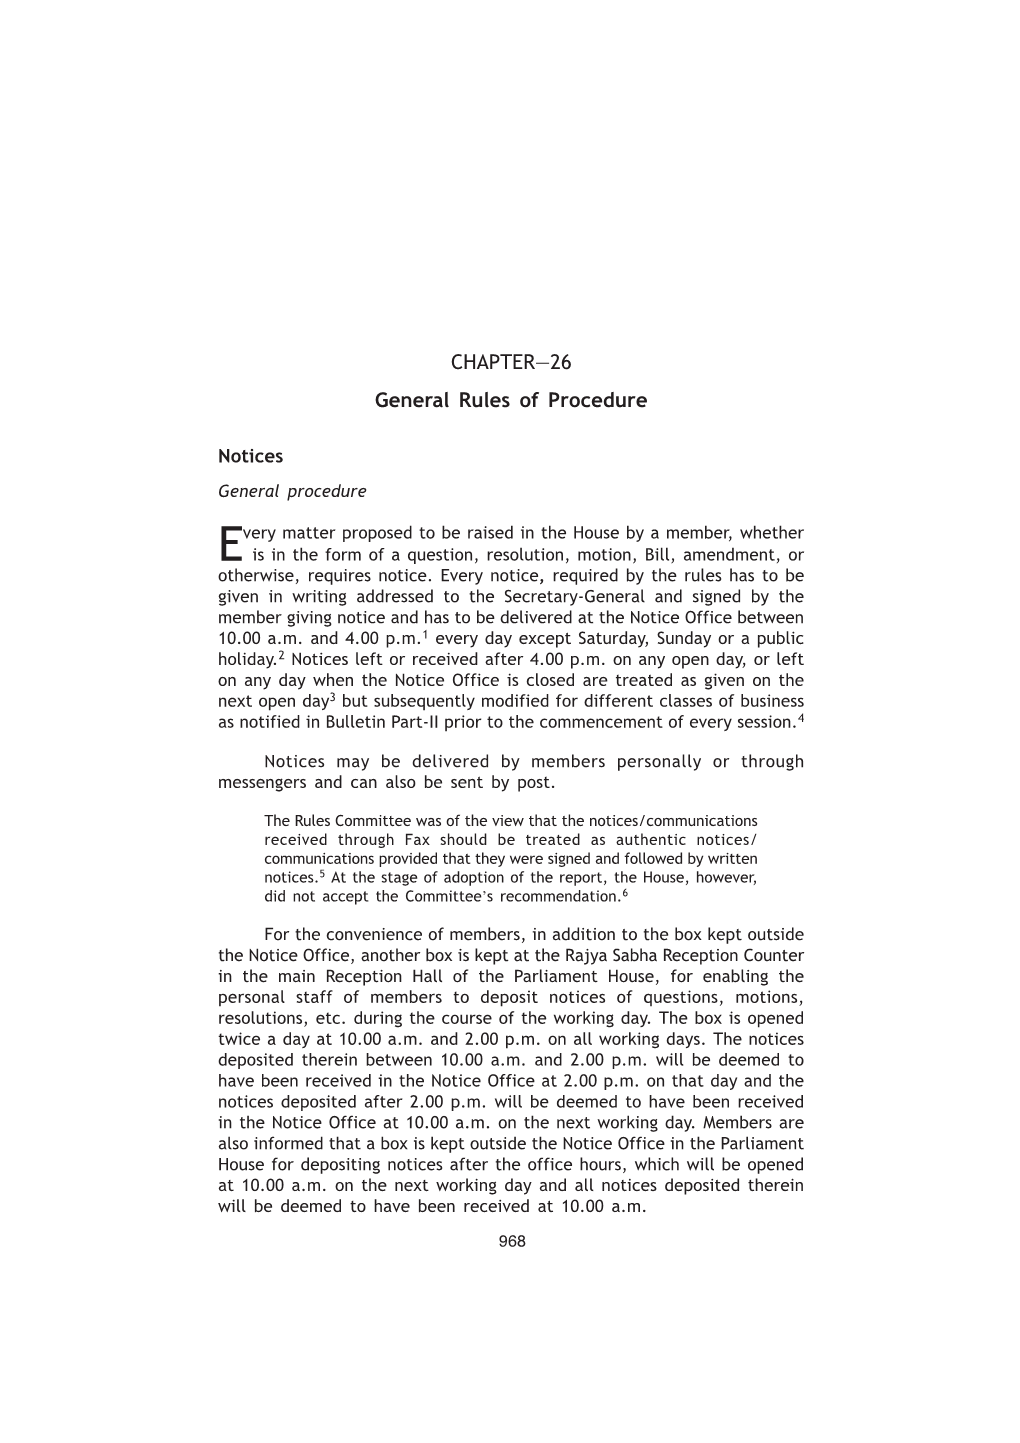 CHAPTER—26 General Rules of Procedure